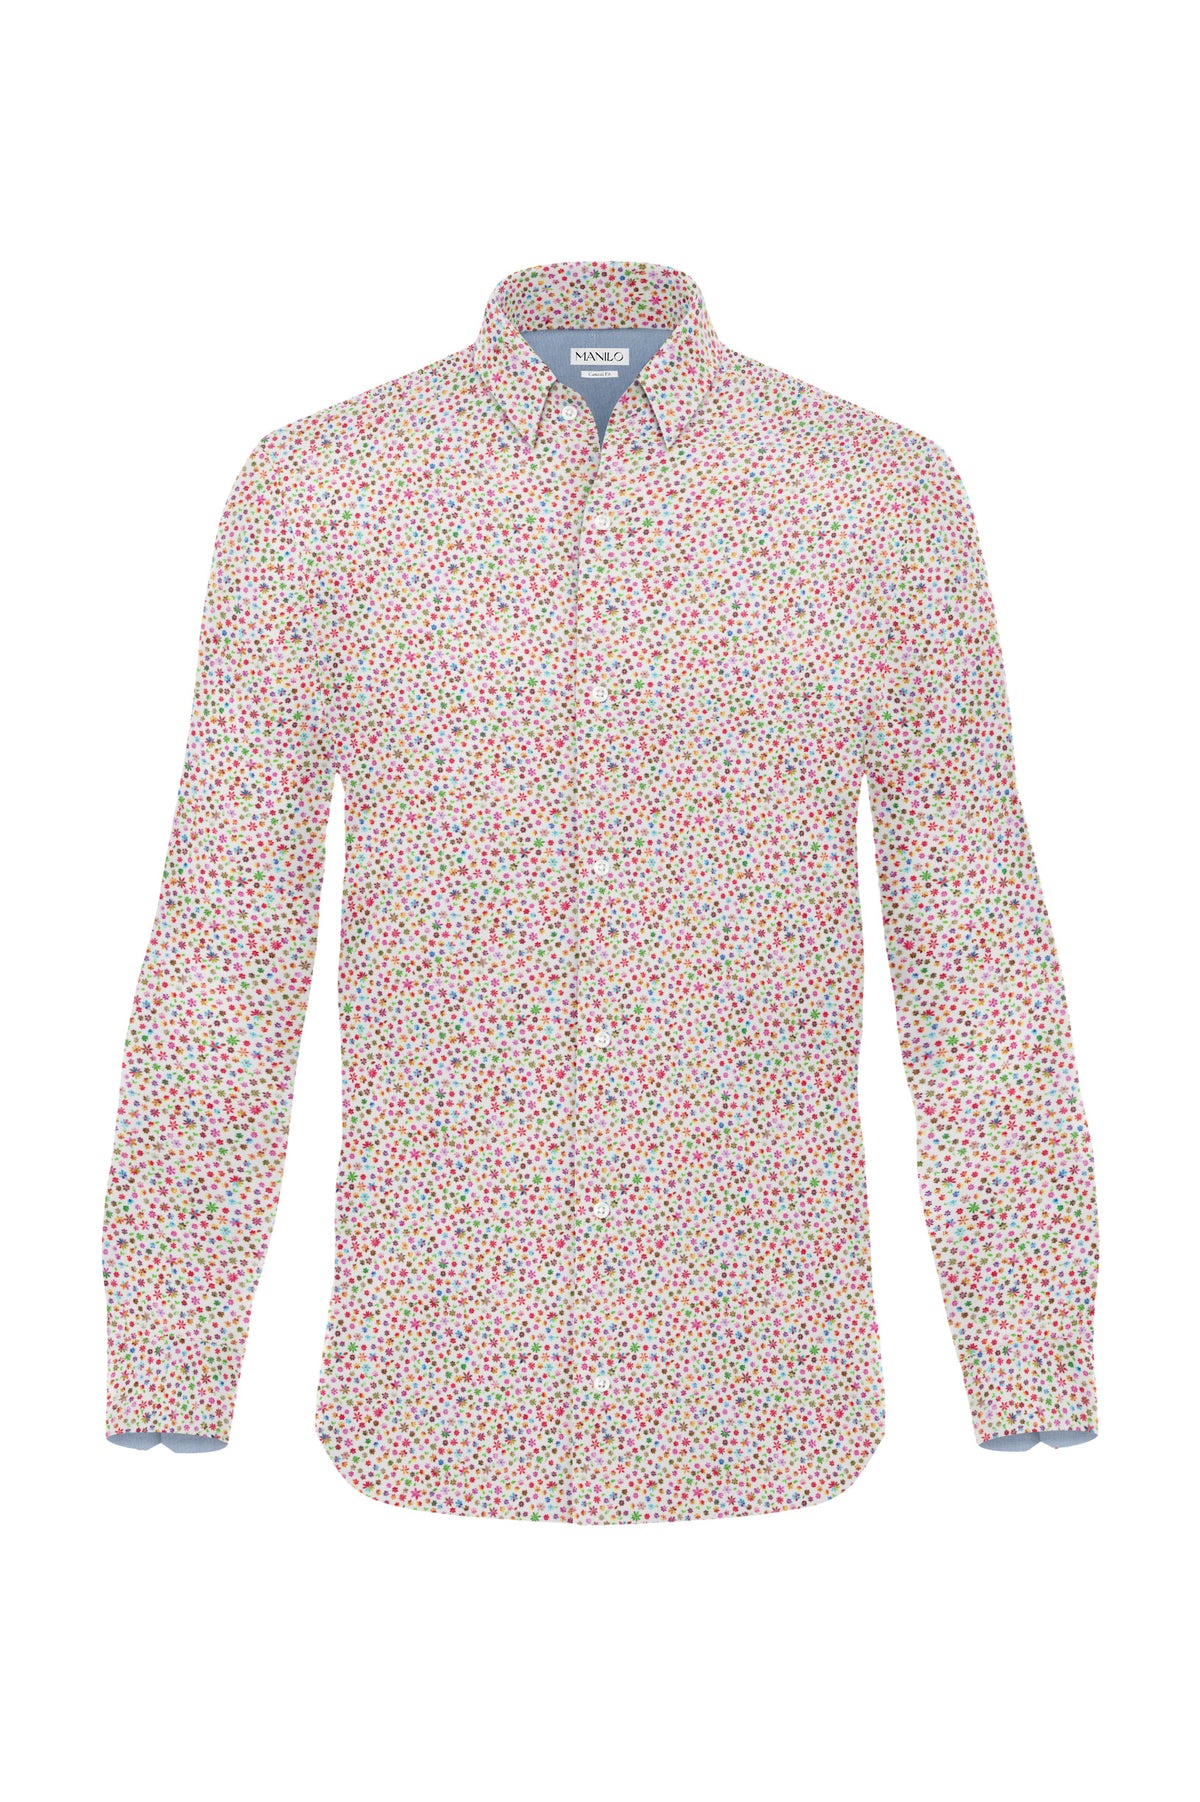 Casual shirt with floral pattern in multicolor (Art. 2215-C)